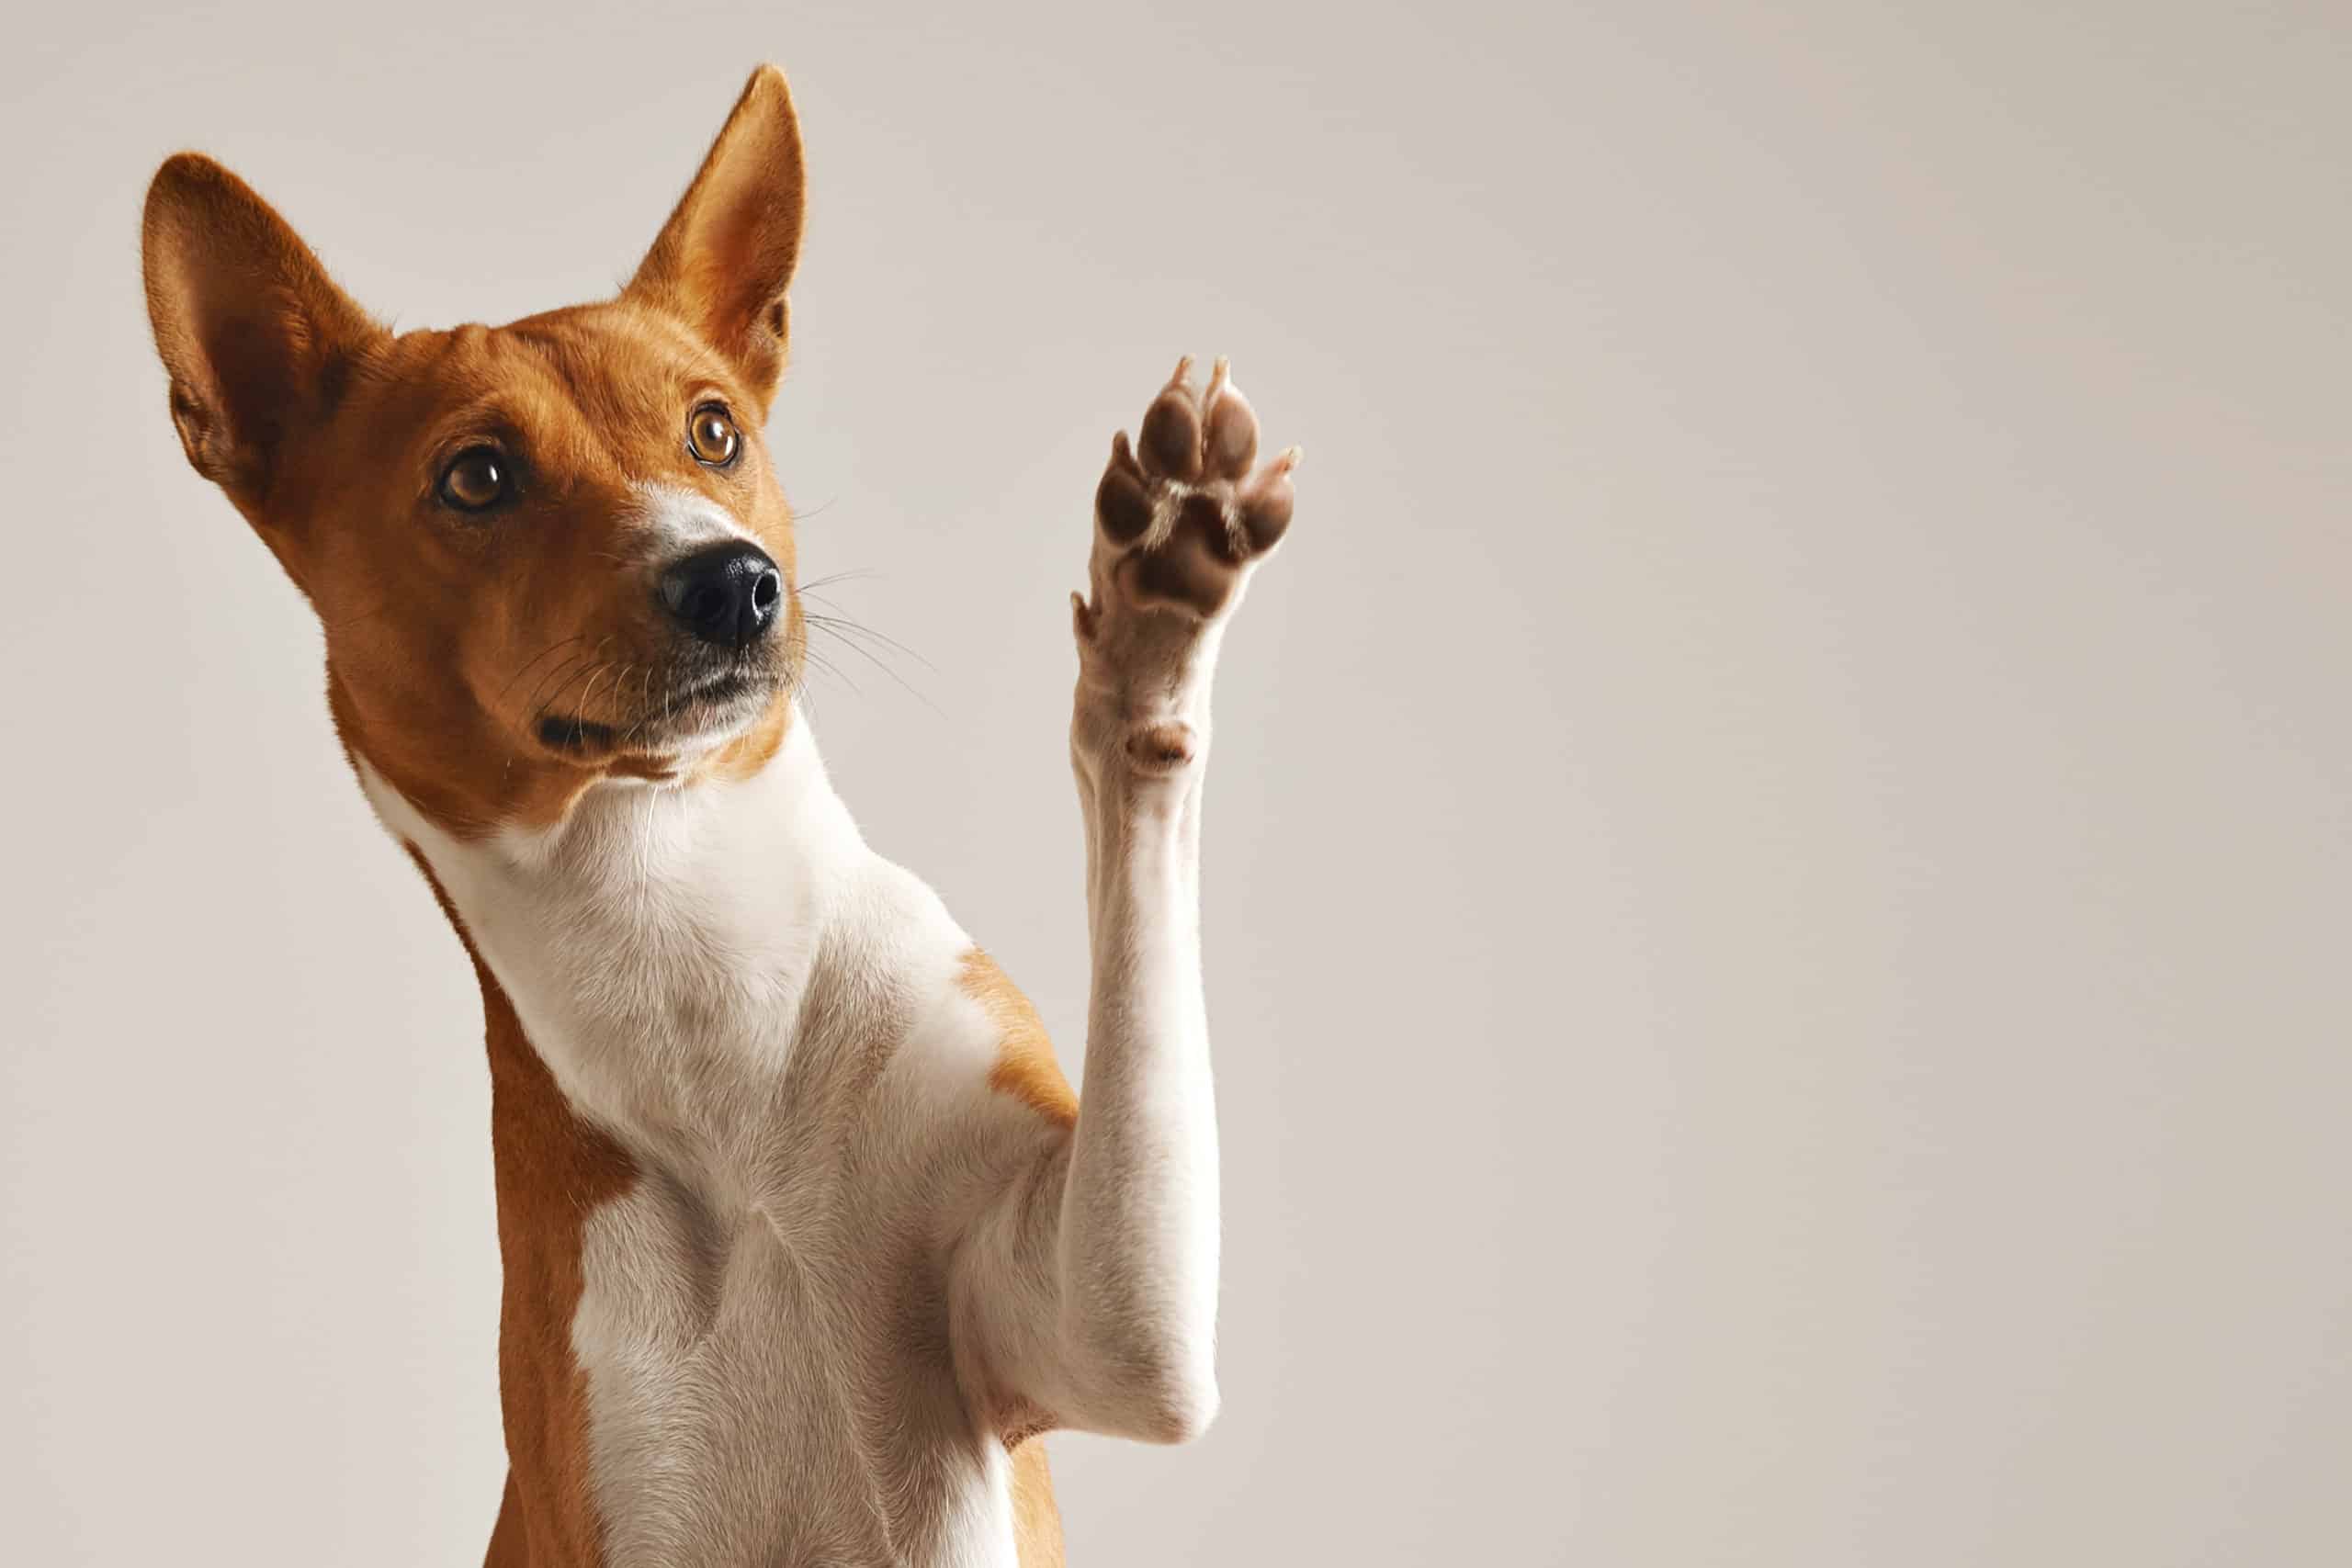 Can You Use Vaseline on a Dog’s Paws?